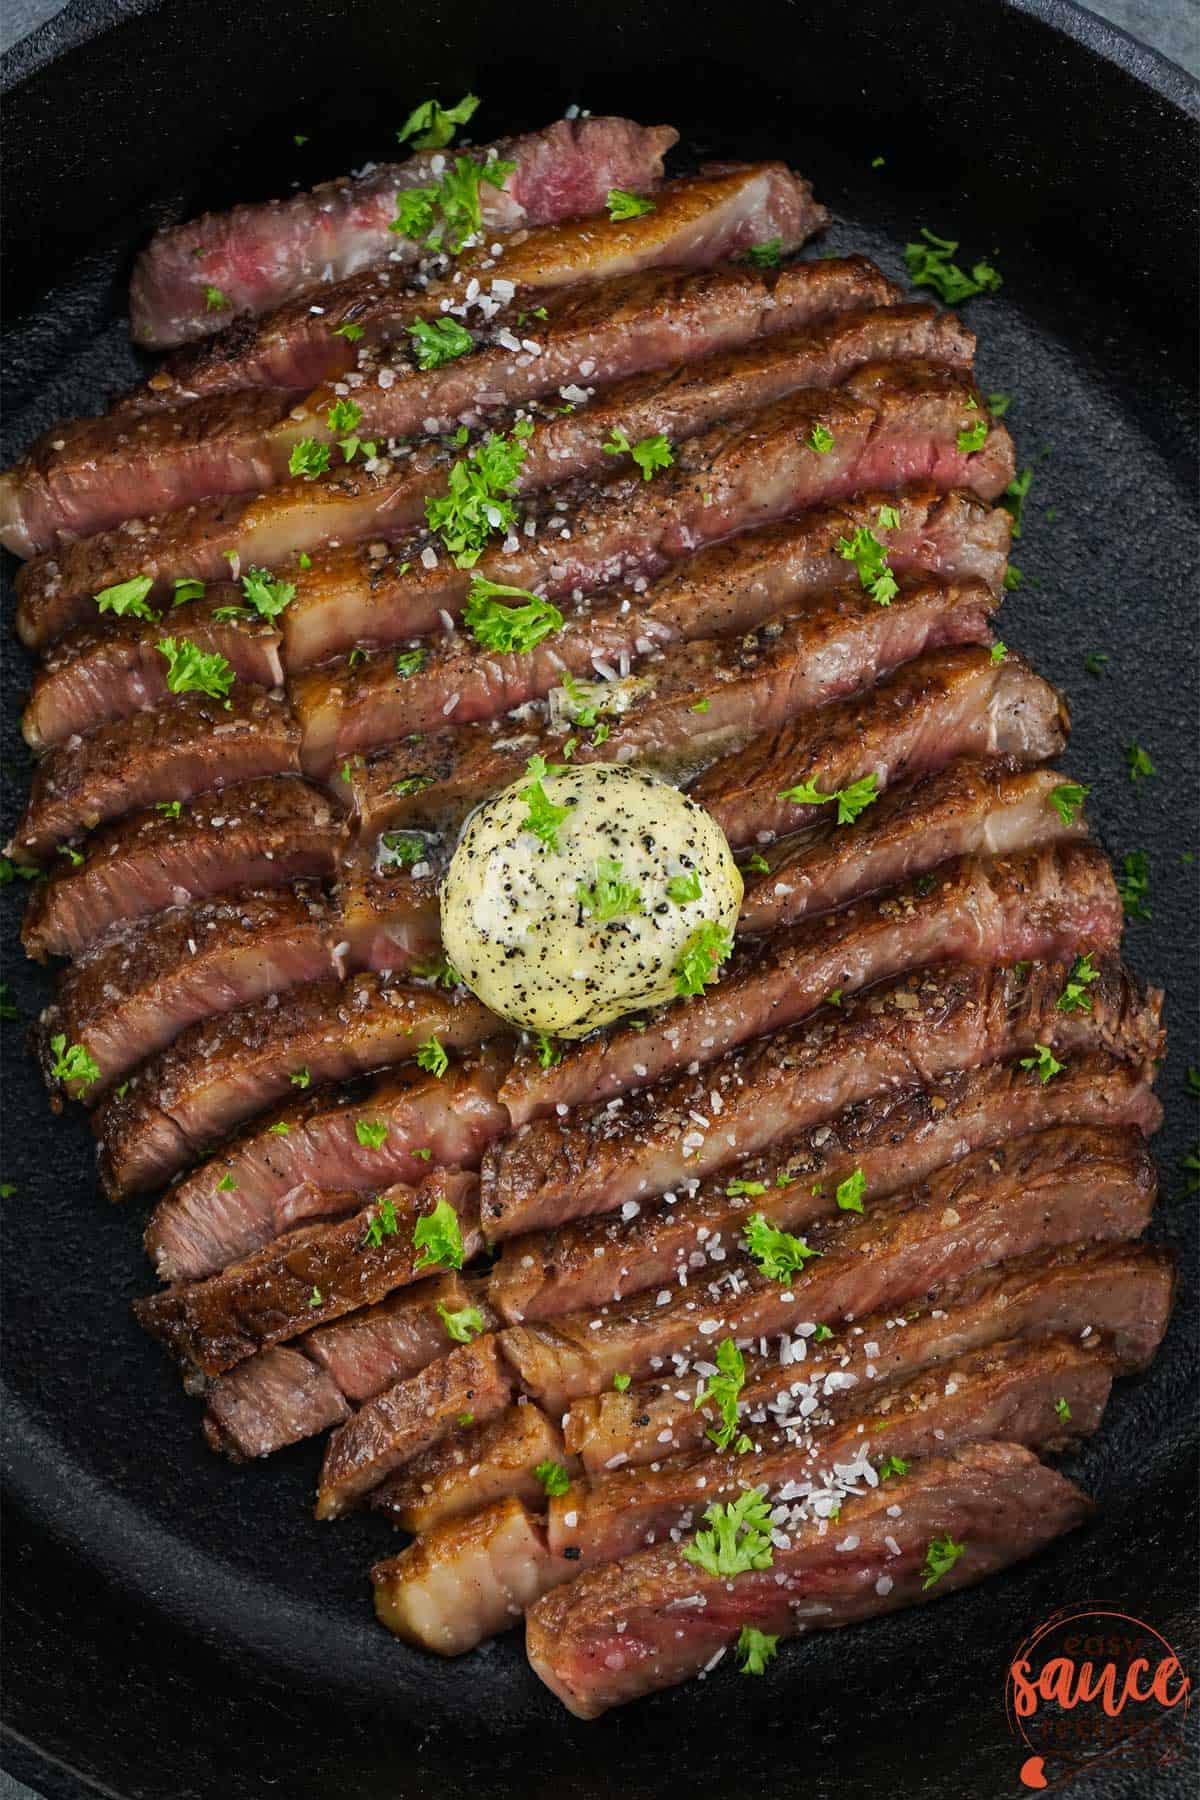 steak slices with truffle butter